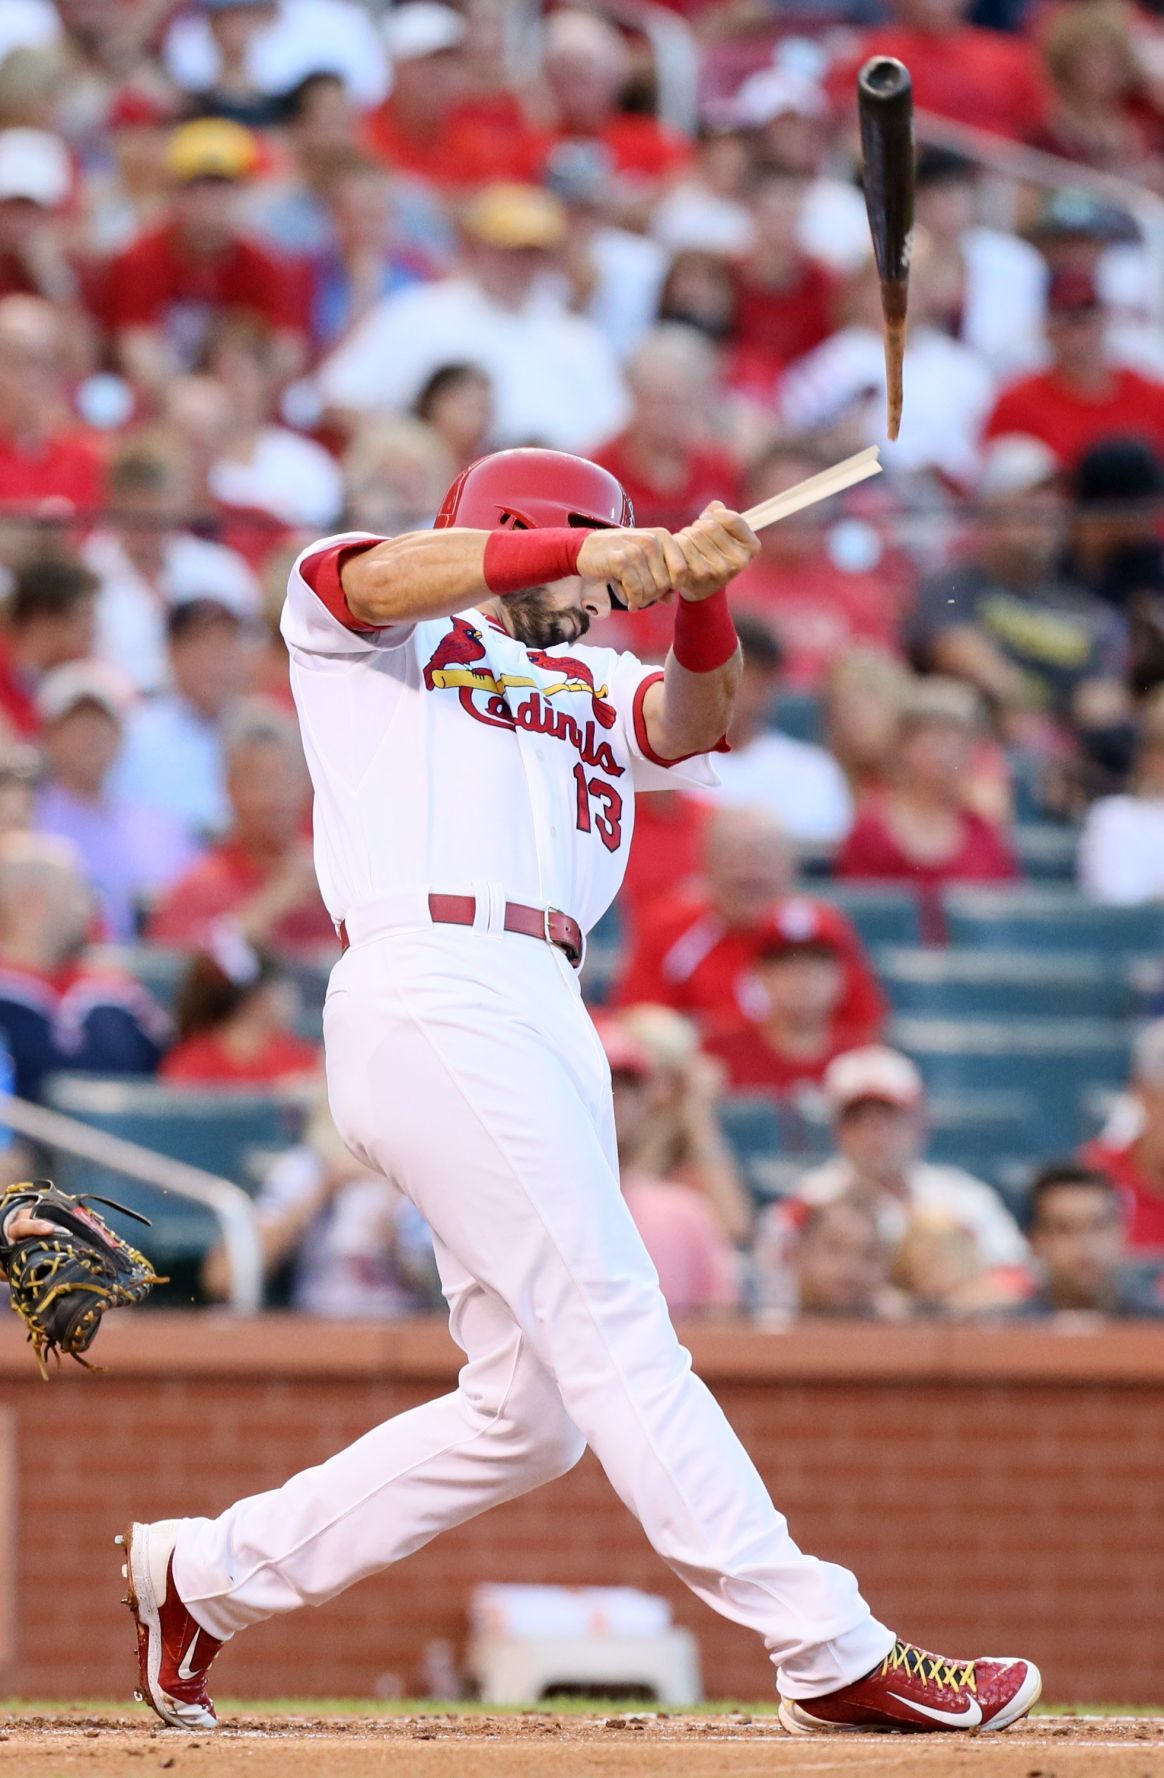 Cards take first game against Pirates | St. Louis Cardinals | www.bagsaleusa.com